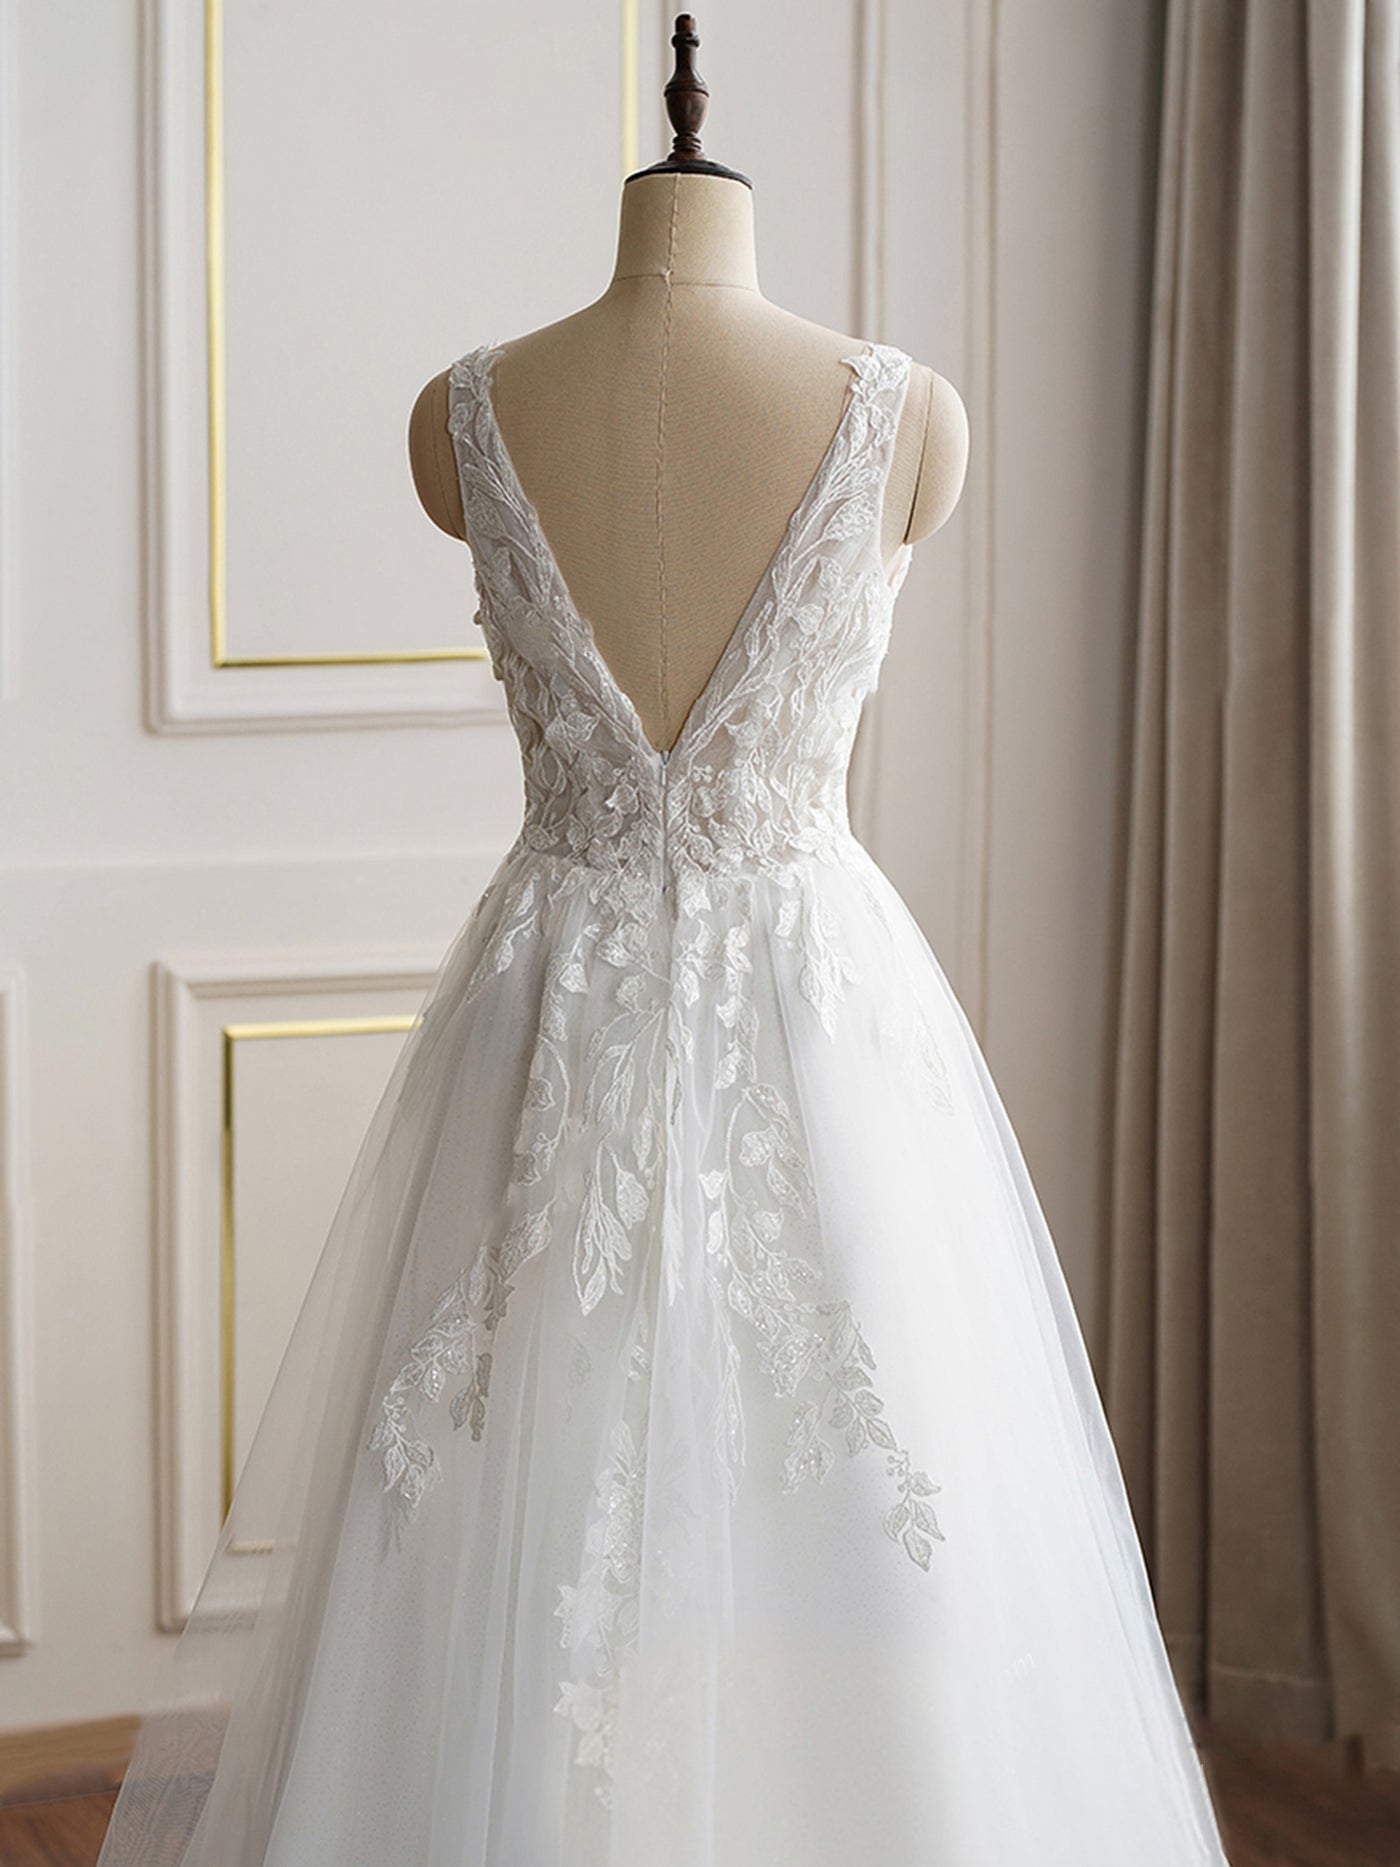 Sexy Lace Plunging Neckline Sleeveless Bridal Gown